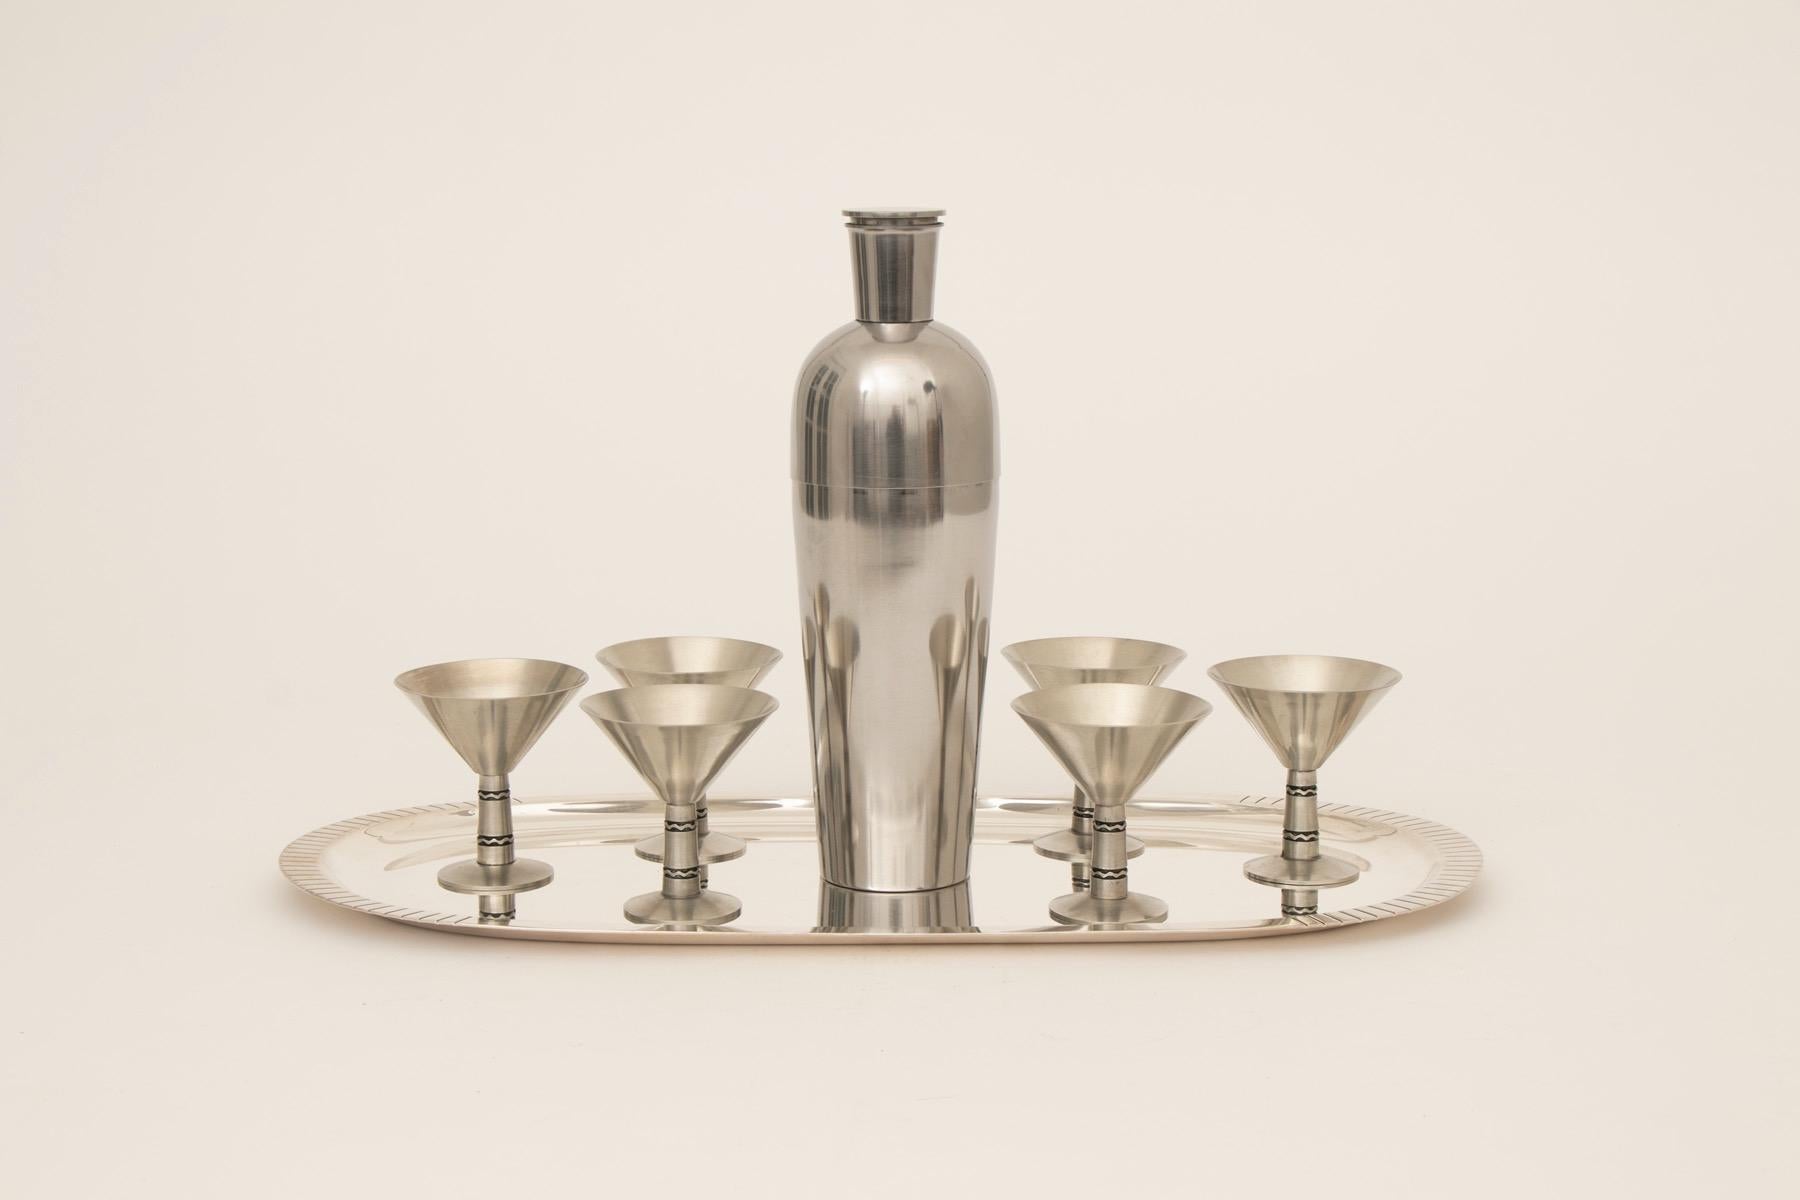 Midcentury Georg Jensen cocktail shaker with six matched cocktail goblets presented on a silver plated tray.
A very stylish and streamline design to this Georg Jensen cocktail shaker, and nicely matched with these machine turned goblets, all